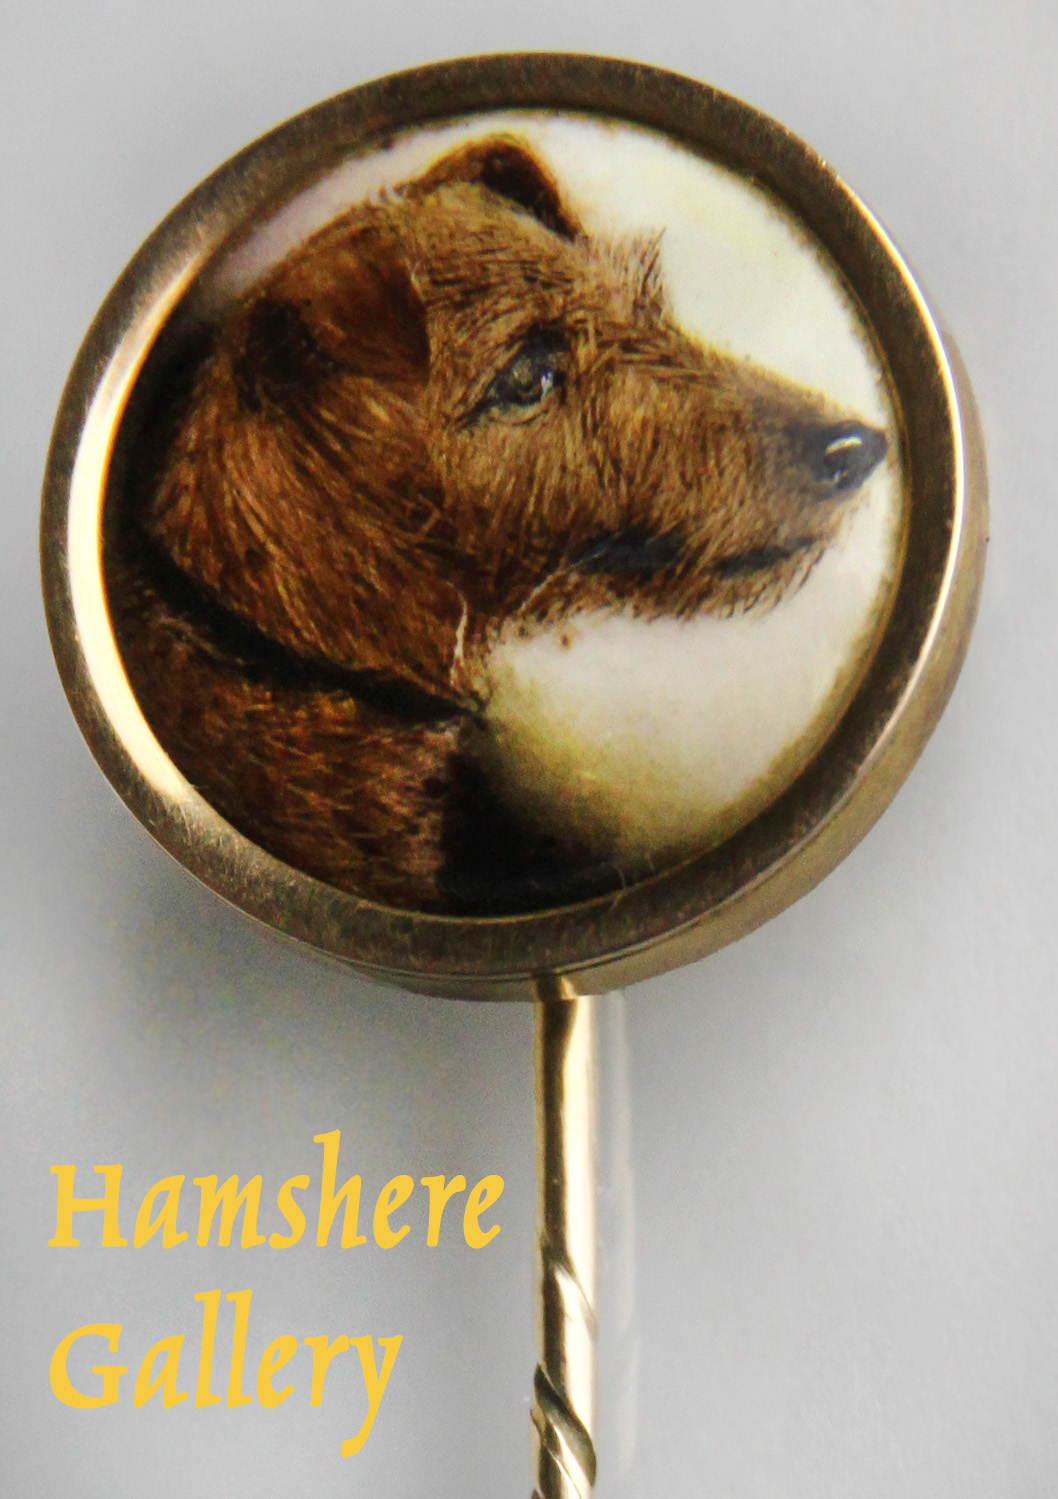 Click to see full size: The Irish Terrier “Fire-flyer”, enamel stick pin by John William Bailey (English, 1831 – 1914)- The Irish Terrier “Fire-flyer”, enamel stick pin by John William Bailey (English, 1831 – 1914)